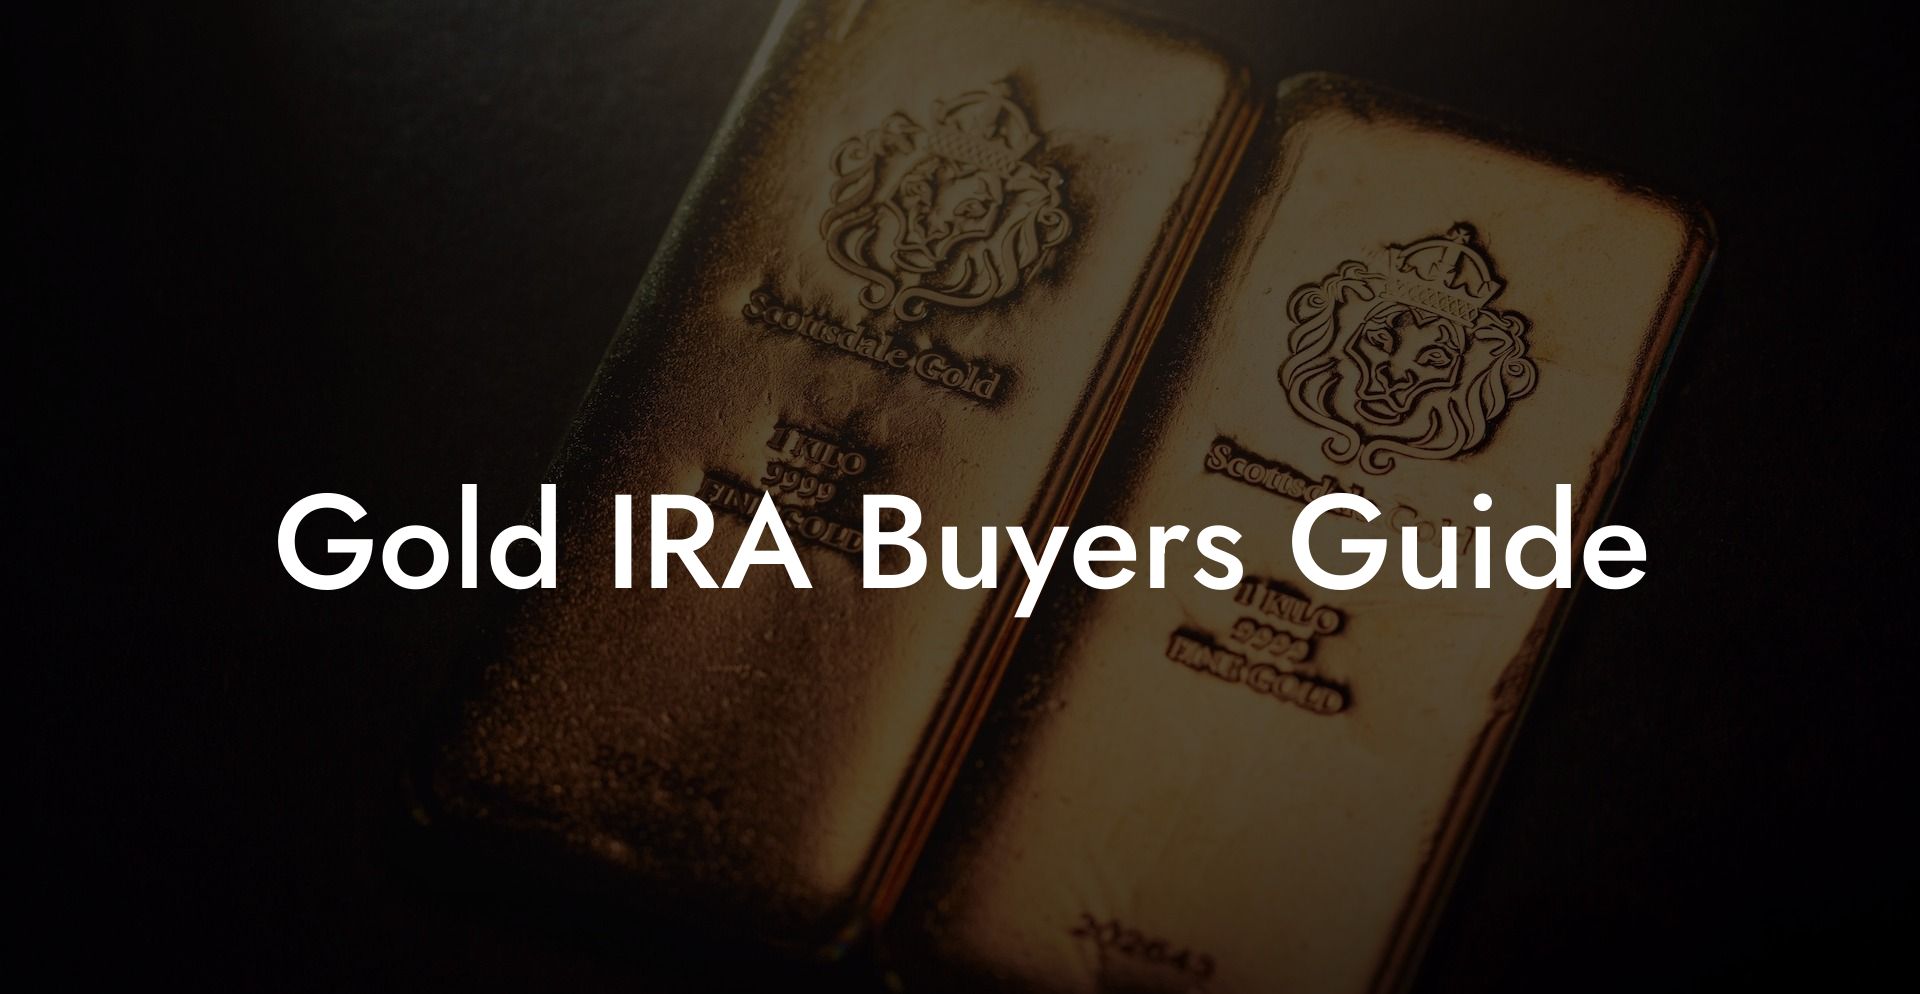 Gold IRA Buyers Guide